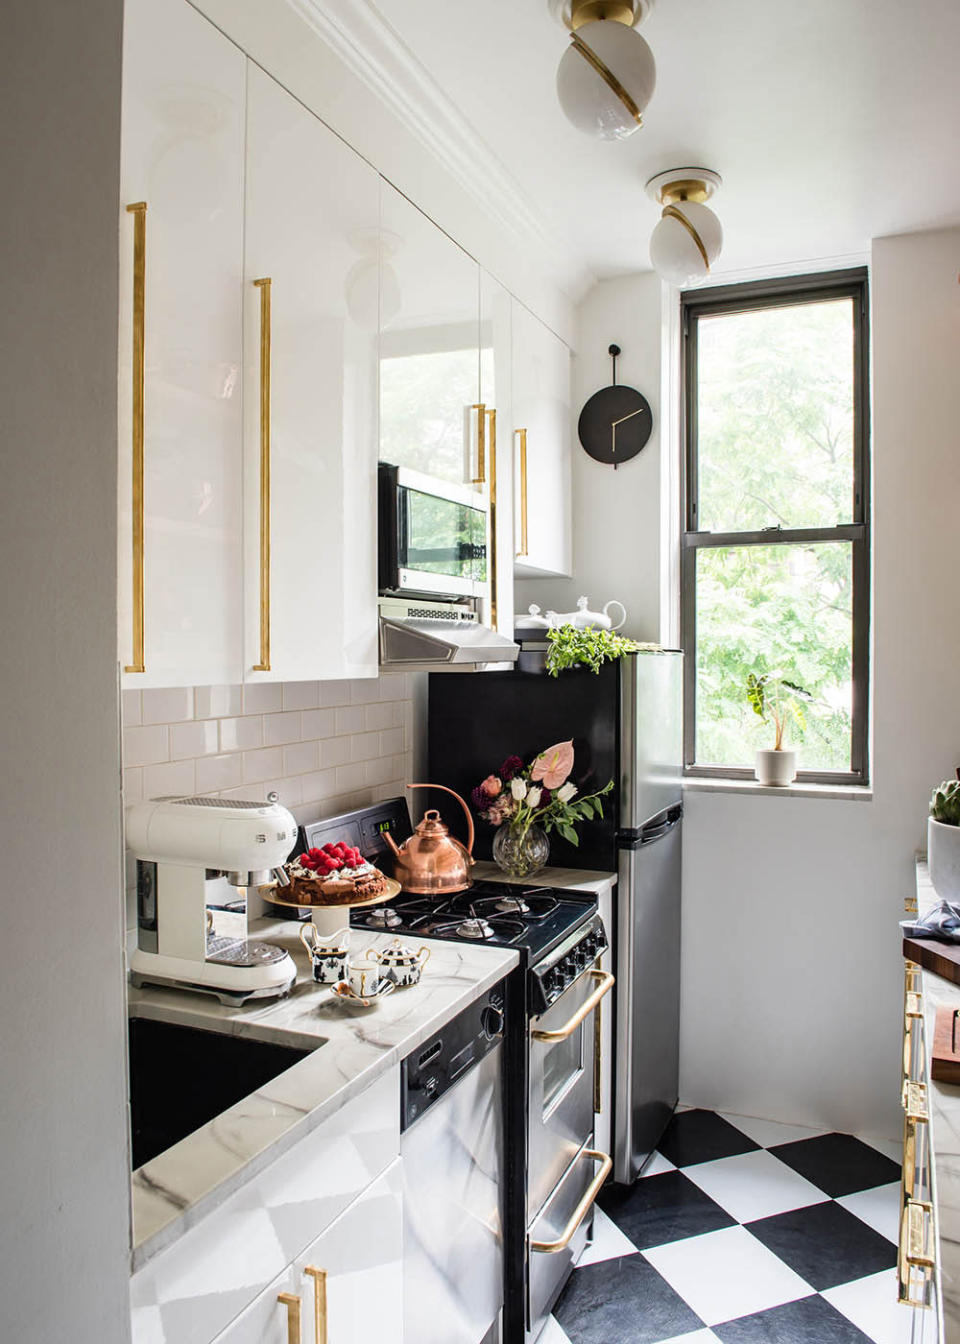 Natasha revamped her tiny kitchen with marble-like, heat-resistant countertops thanks to a collaboration with Oregon-based Stone Coat Countertops. “I reached out to the company, and they loved what I was doing and flew in to make me this countertop,” she says.